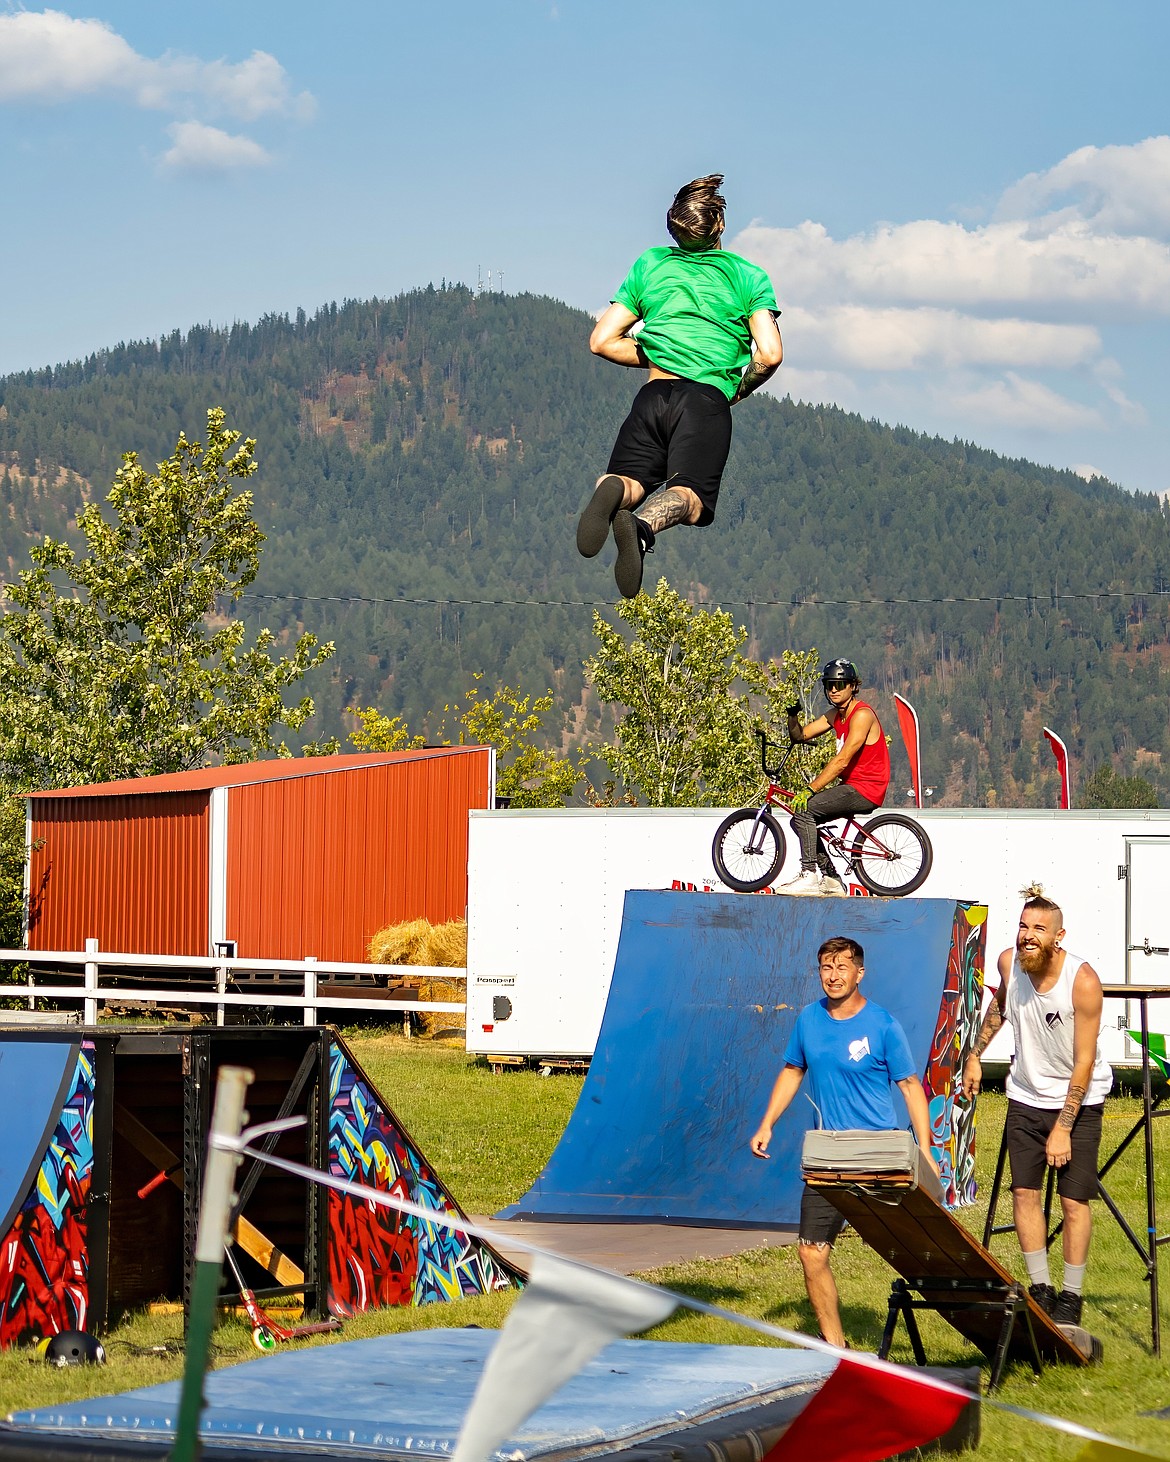 BMX stunts and trampoline achievements during the Off Axis Stunt Show.